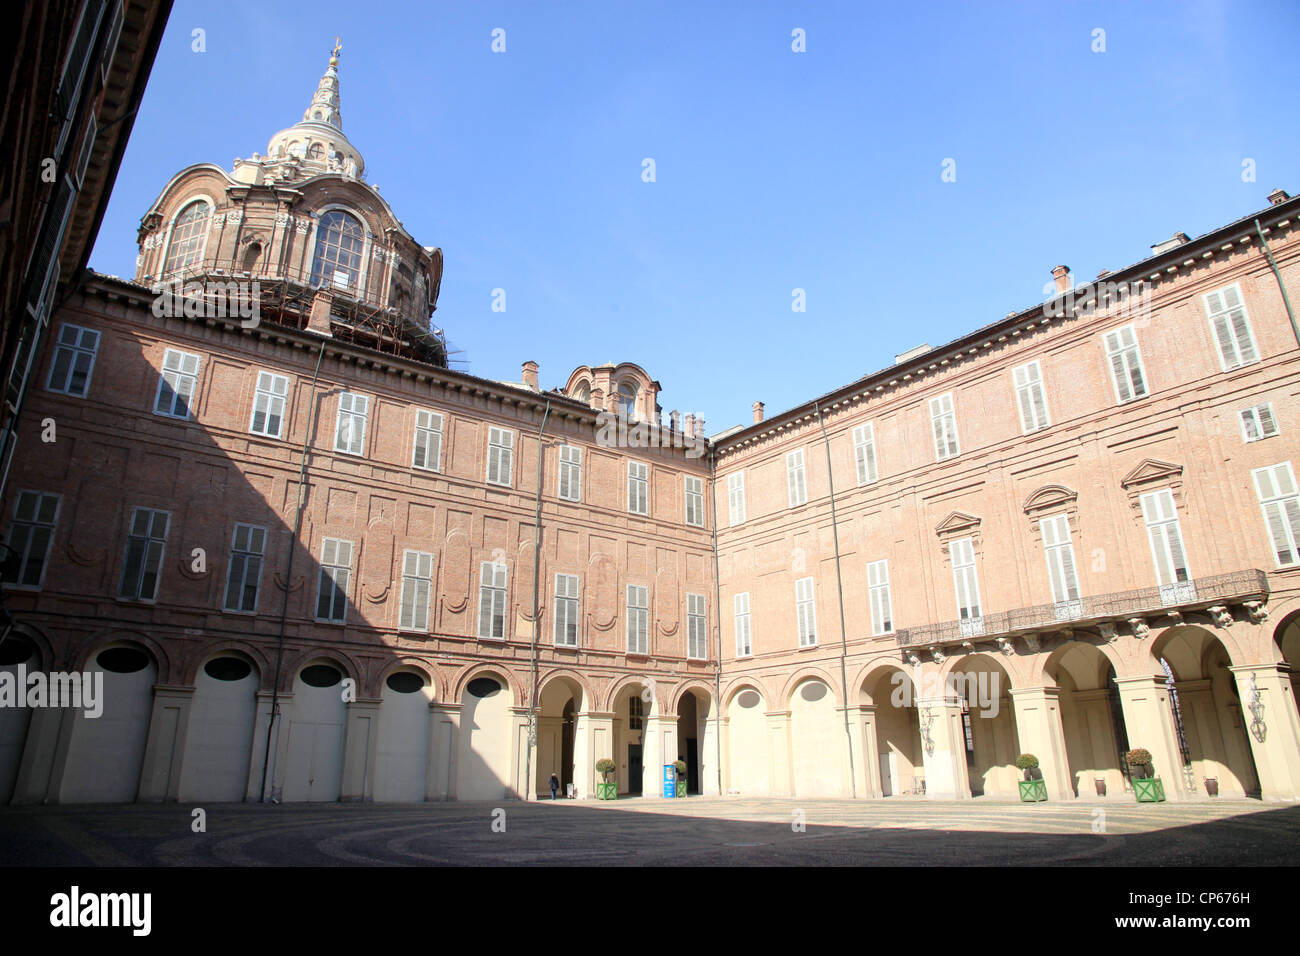 The internal courtyard of Turin's Royal Palace Stock Photo